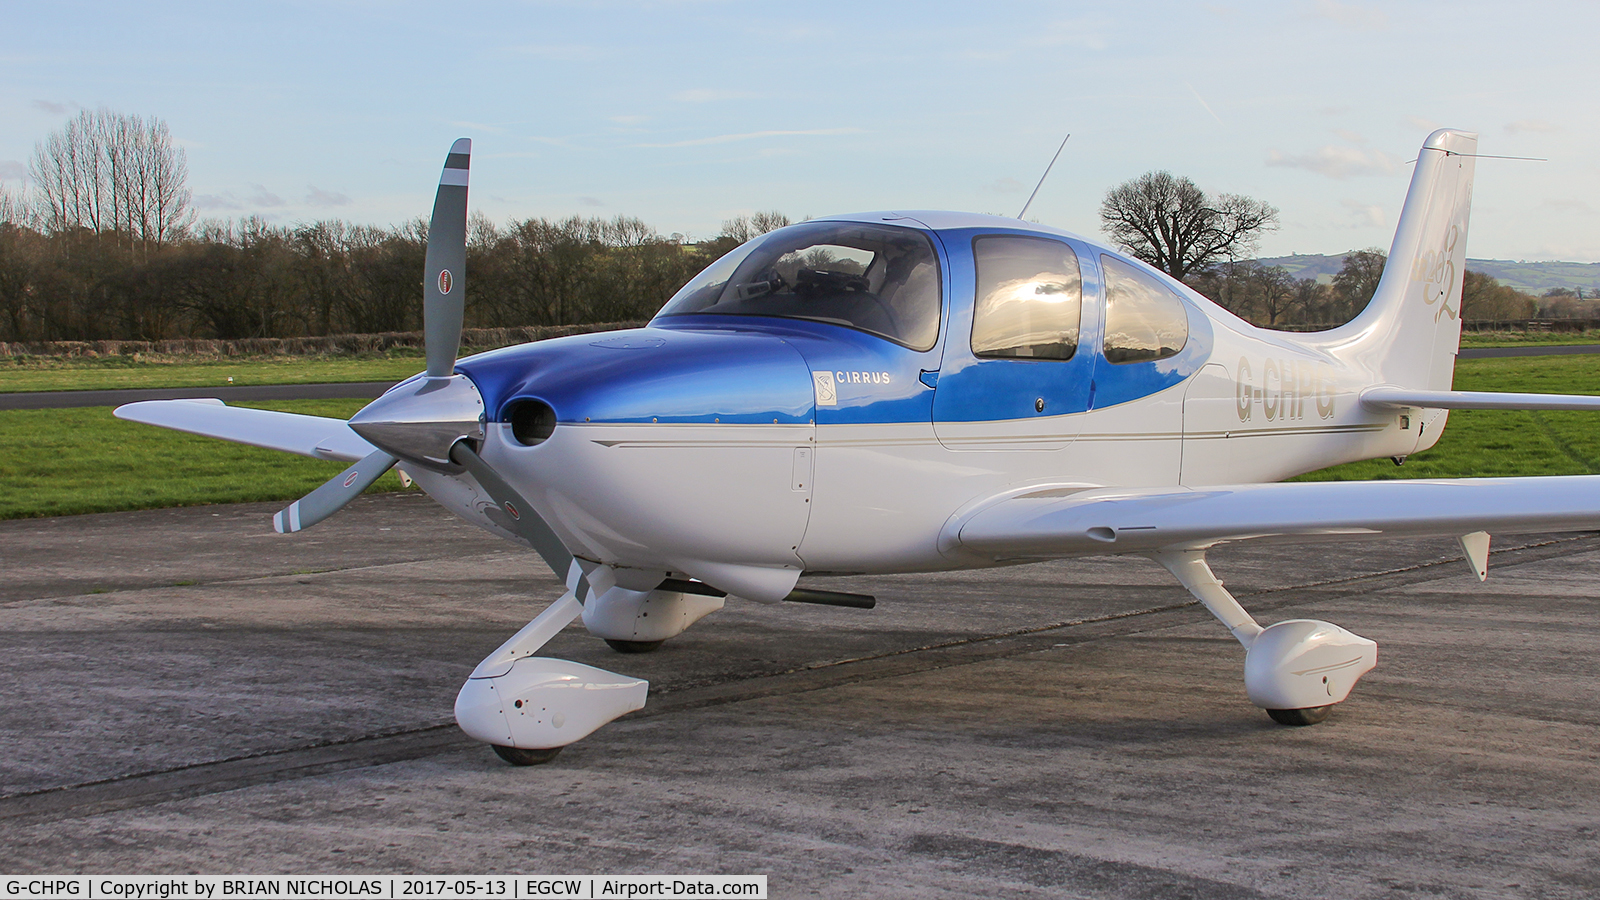 G-CHPG, 2006 Cirrus SR20 C/N 1636, Here at Welshpool on business